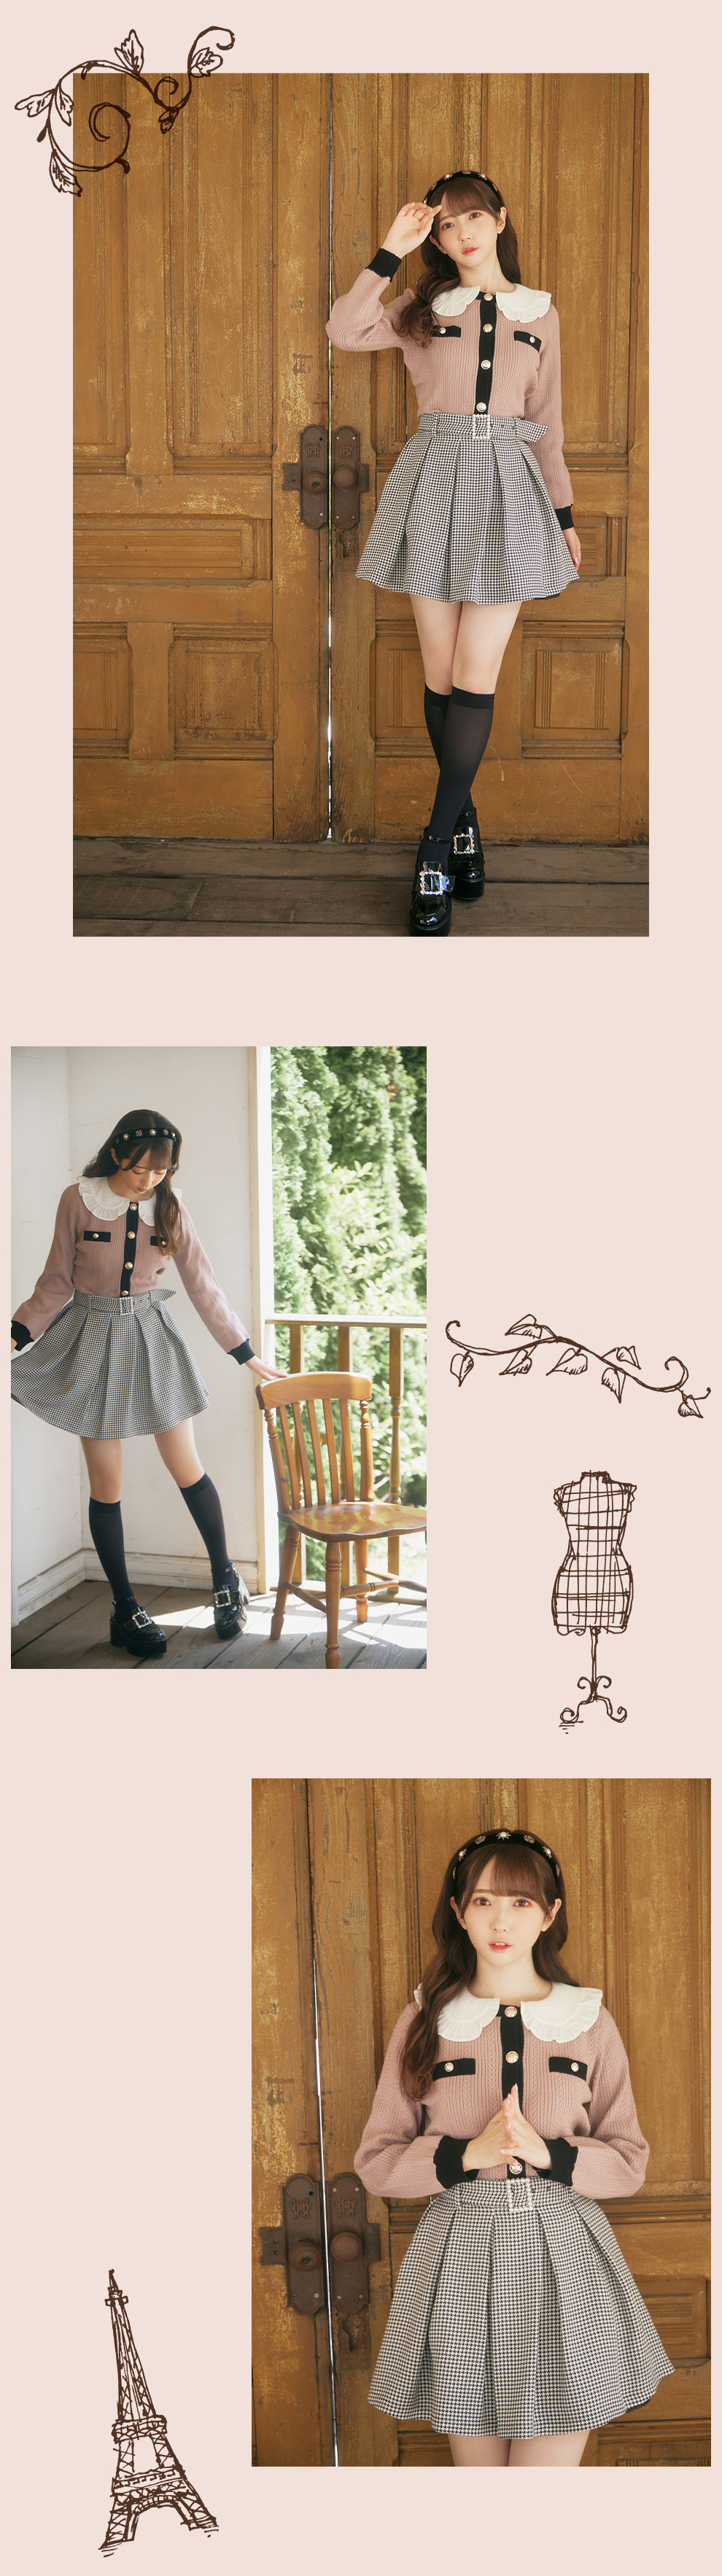 2021 Girly Autumn Collection vol.3